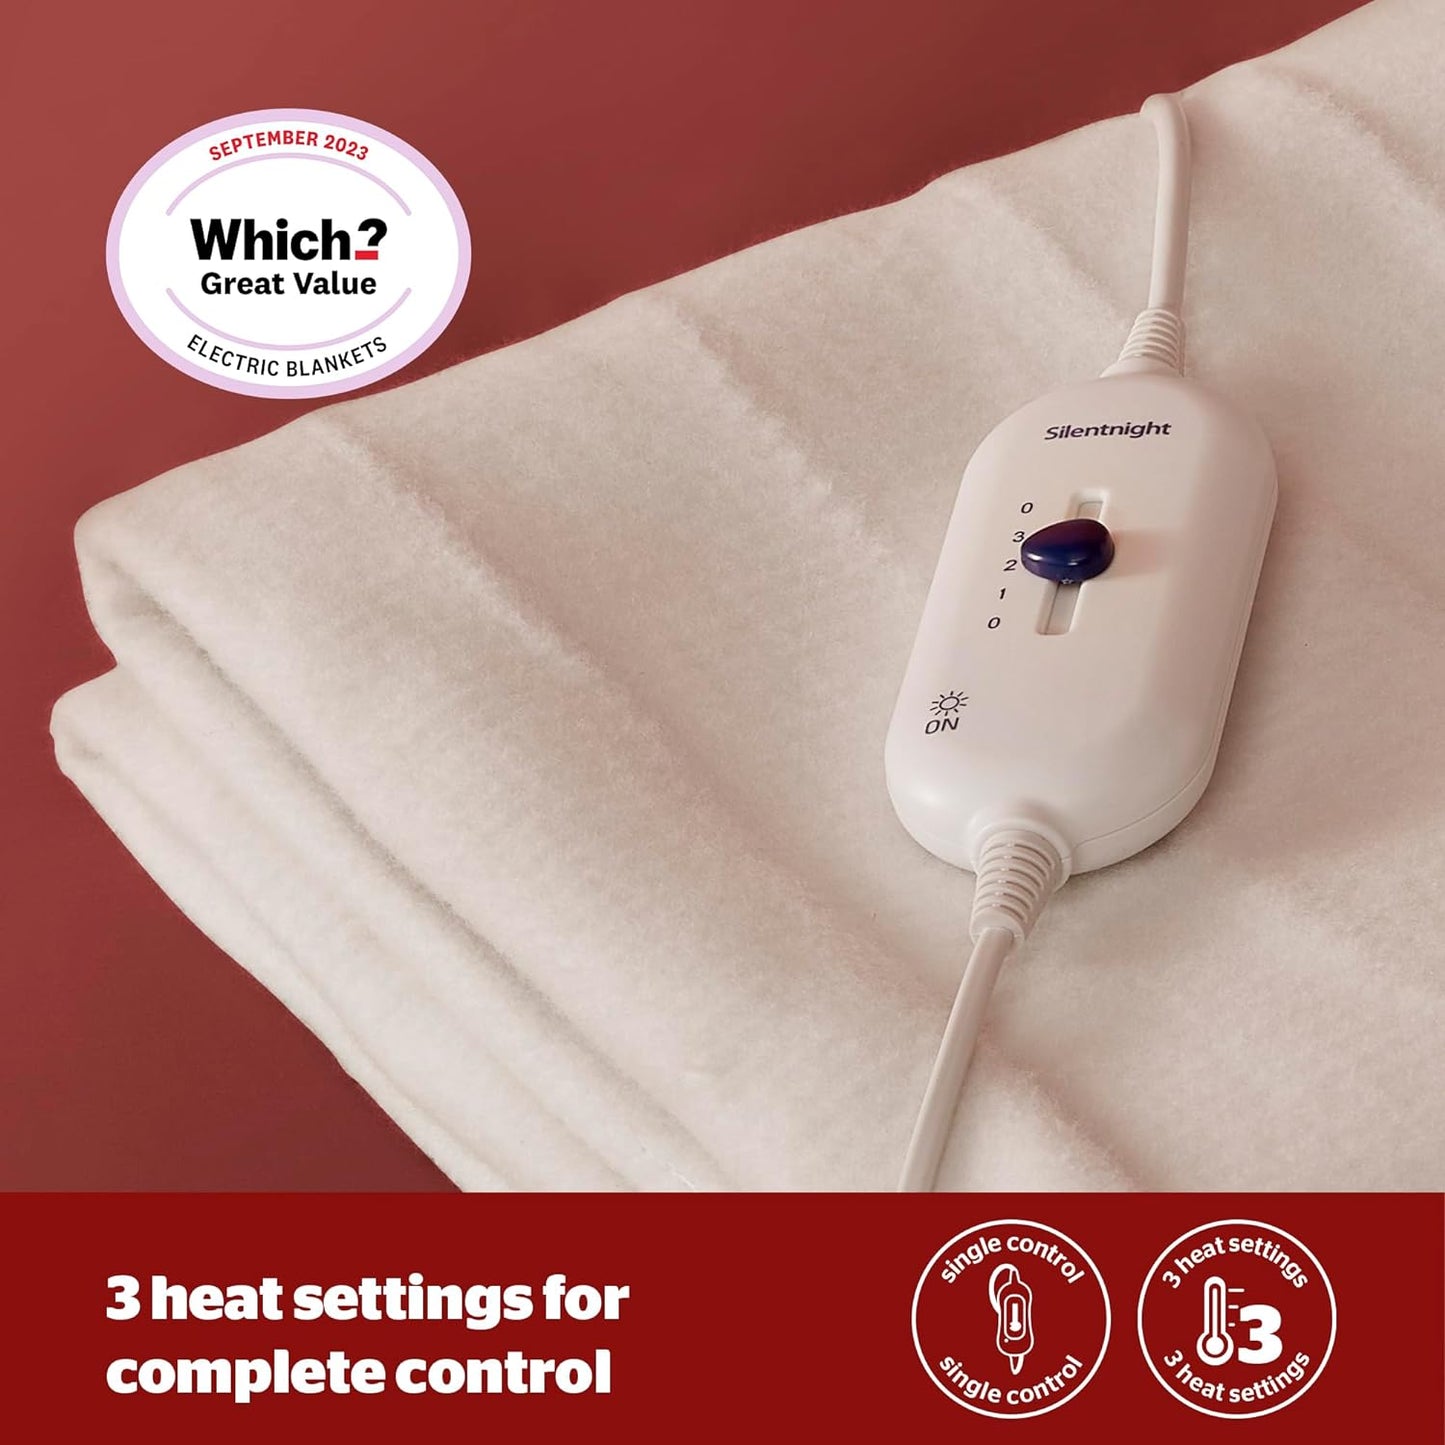 Comfort Control Electric Blanket - Heated Underblanket with 3 Heat Settings, Fast Heat Up, Overheat Protection and Easy Fit Straps - Machine Washable - Single 135X72Cm